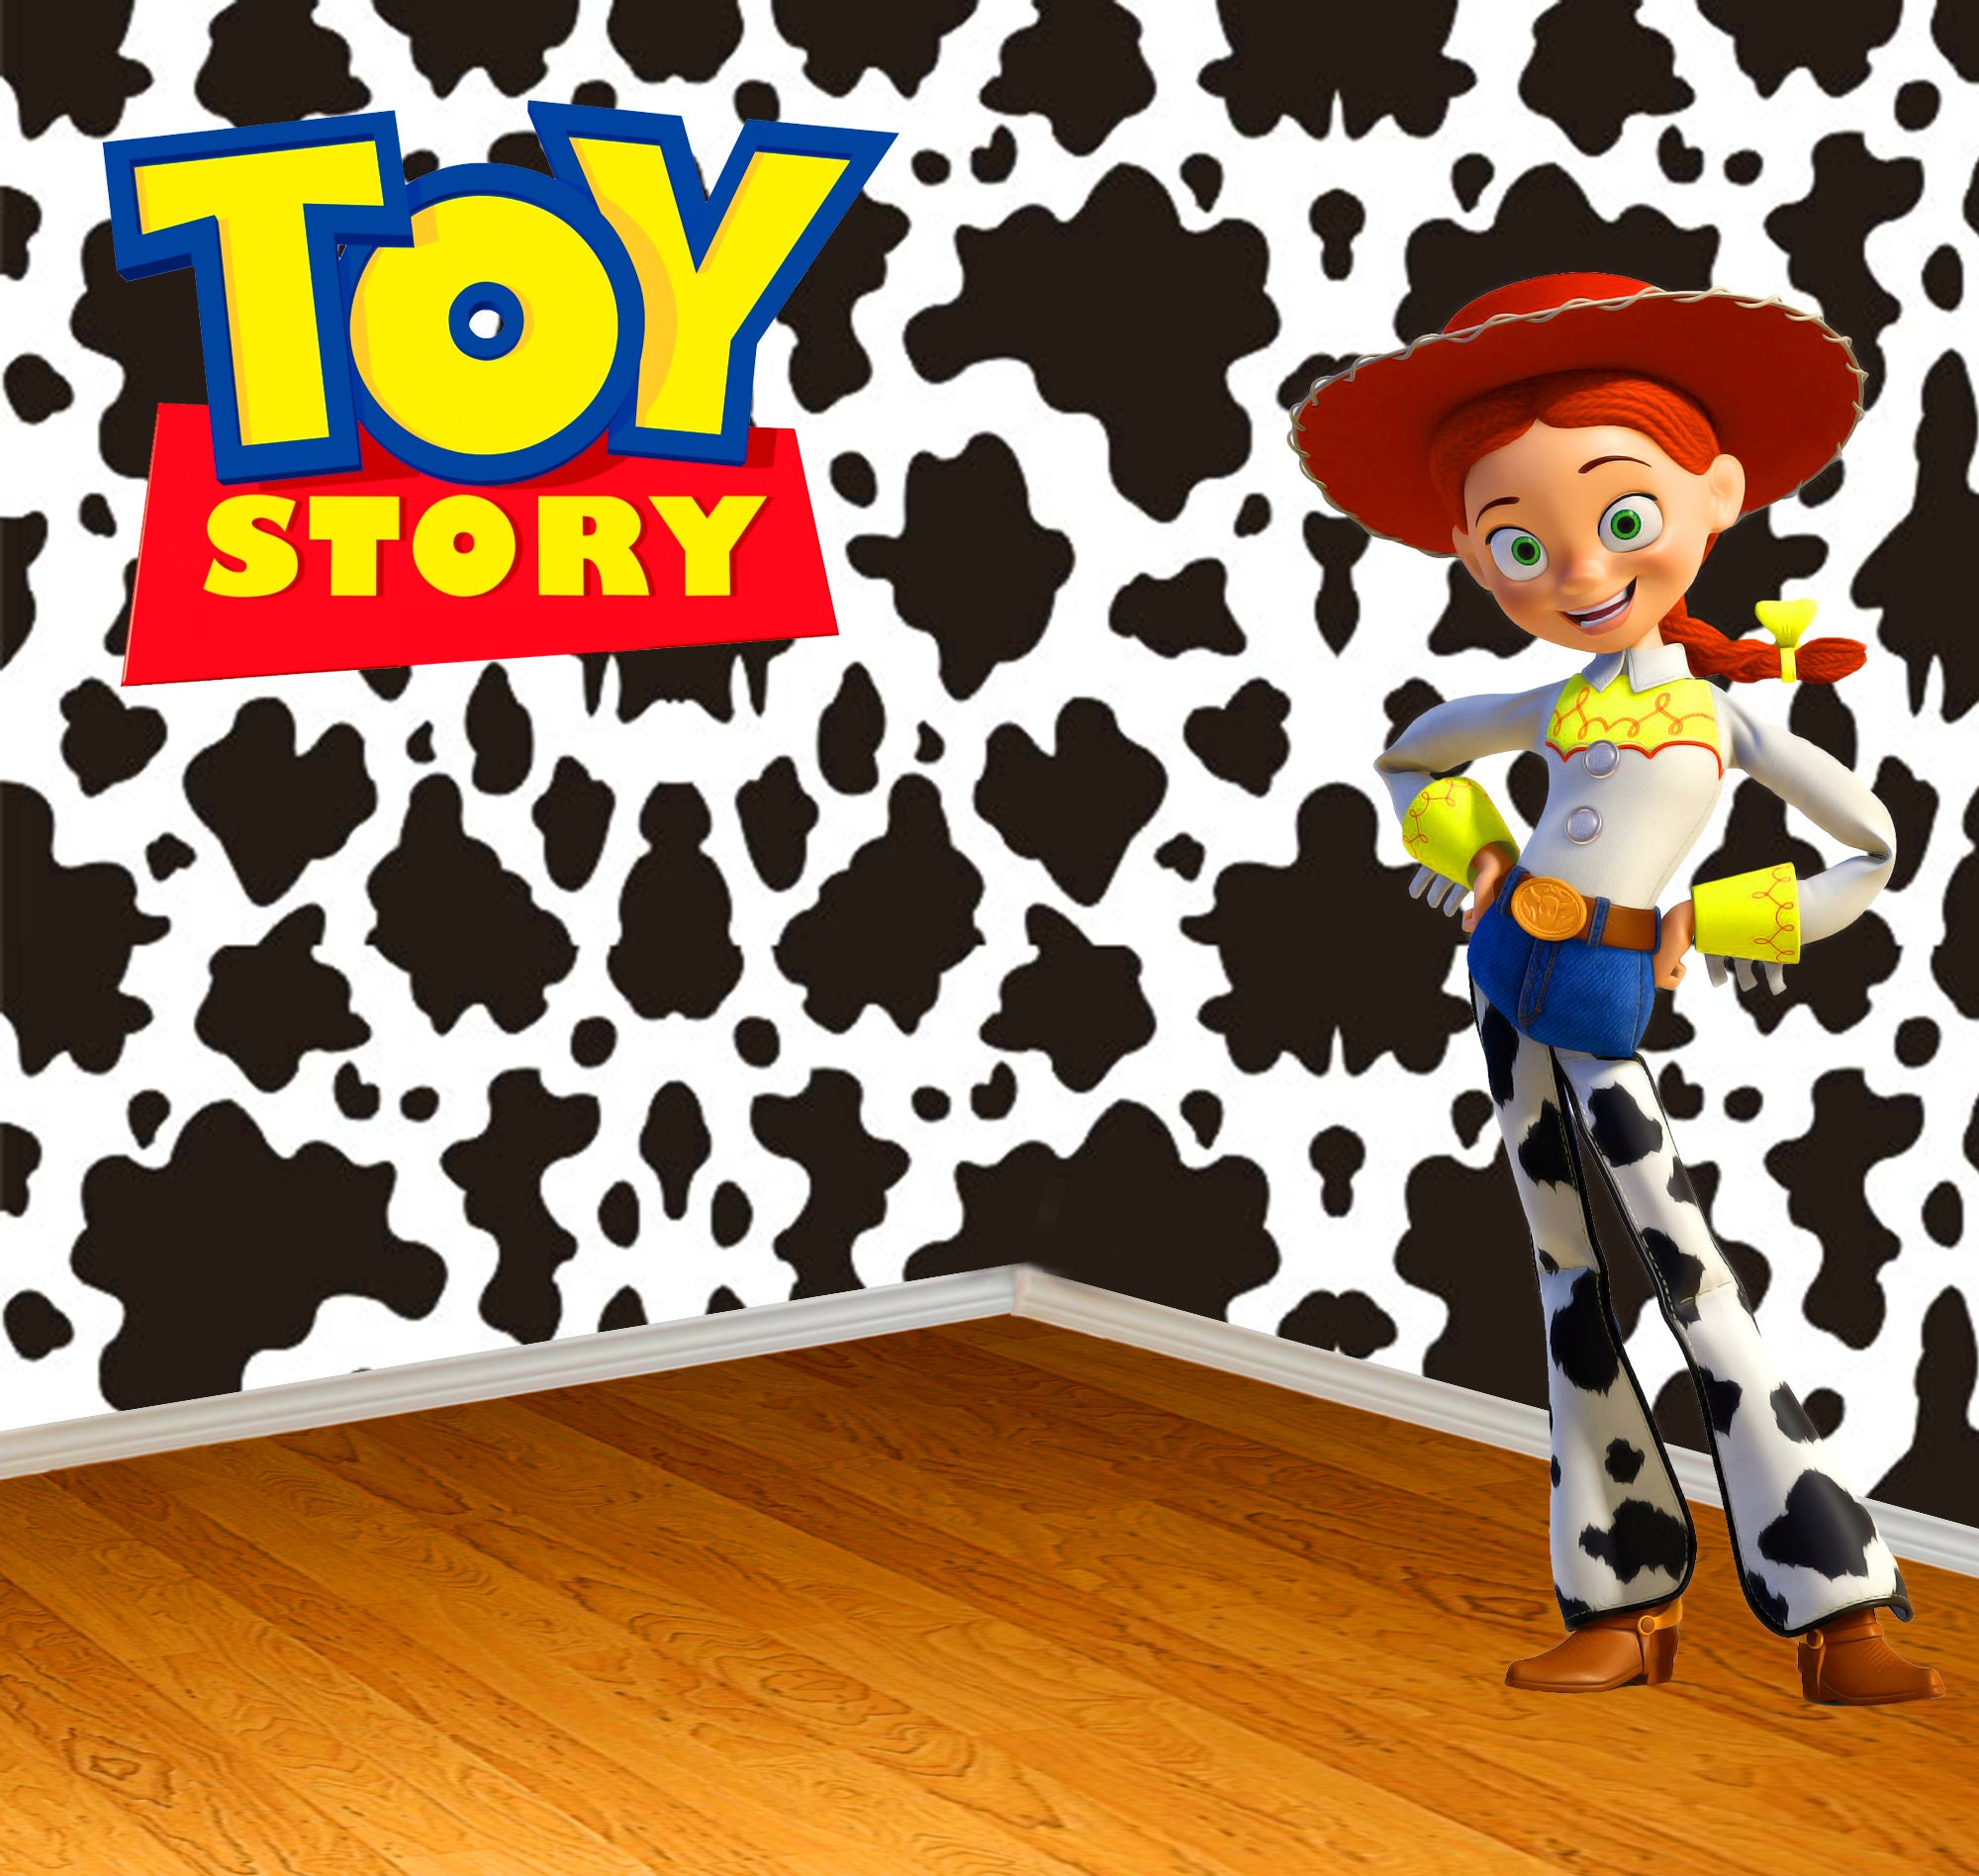 Toy Story Friends Backdrop Featuring Woody Buzz and Jessie - Etsy Ireland